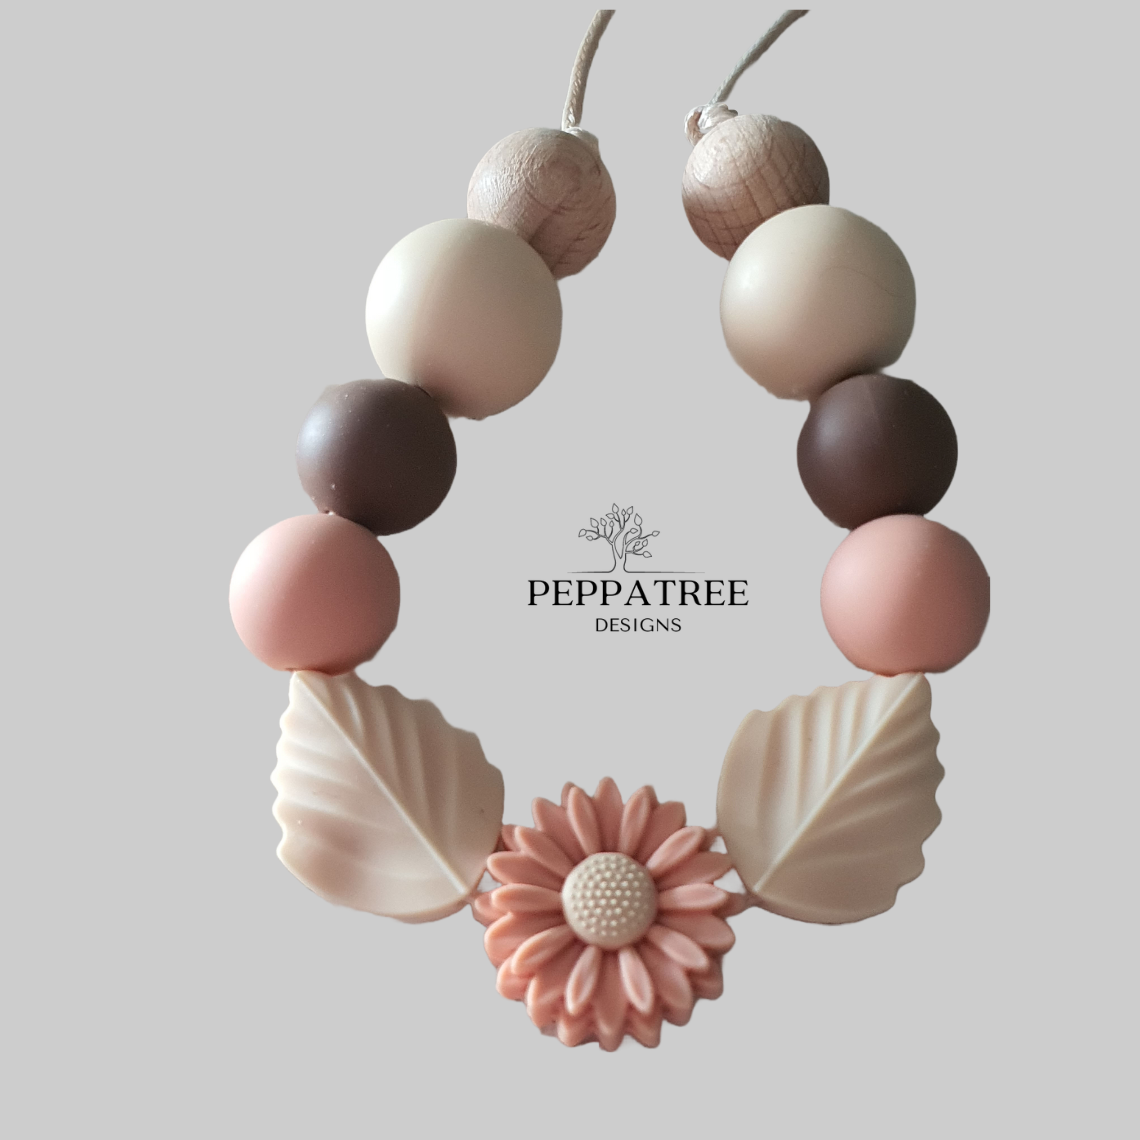 Daisy and Leaf Silicone Bead Necklace in Cream, Peach and Cocoa Brown | Handmade Necklace - PeppaTree Design Store